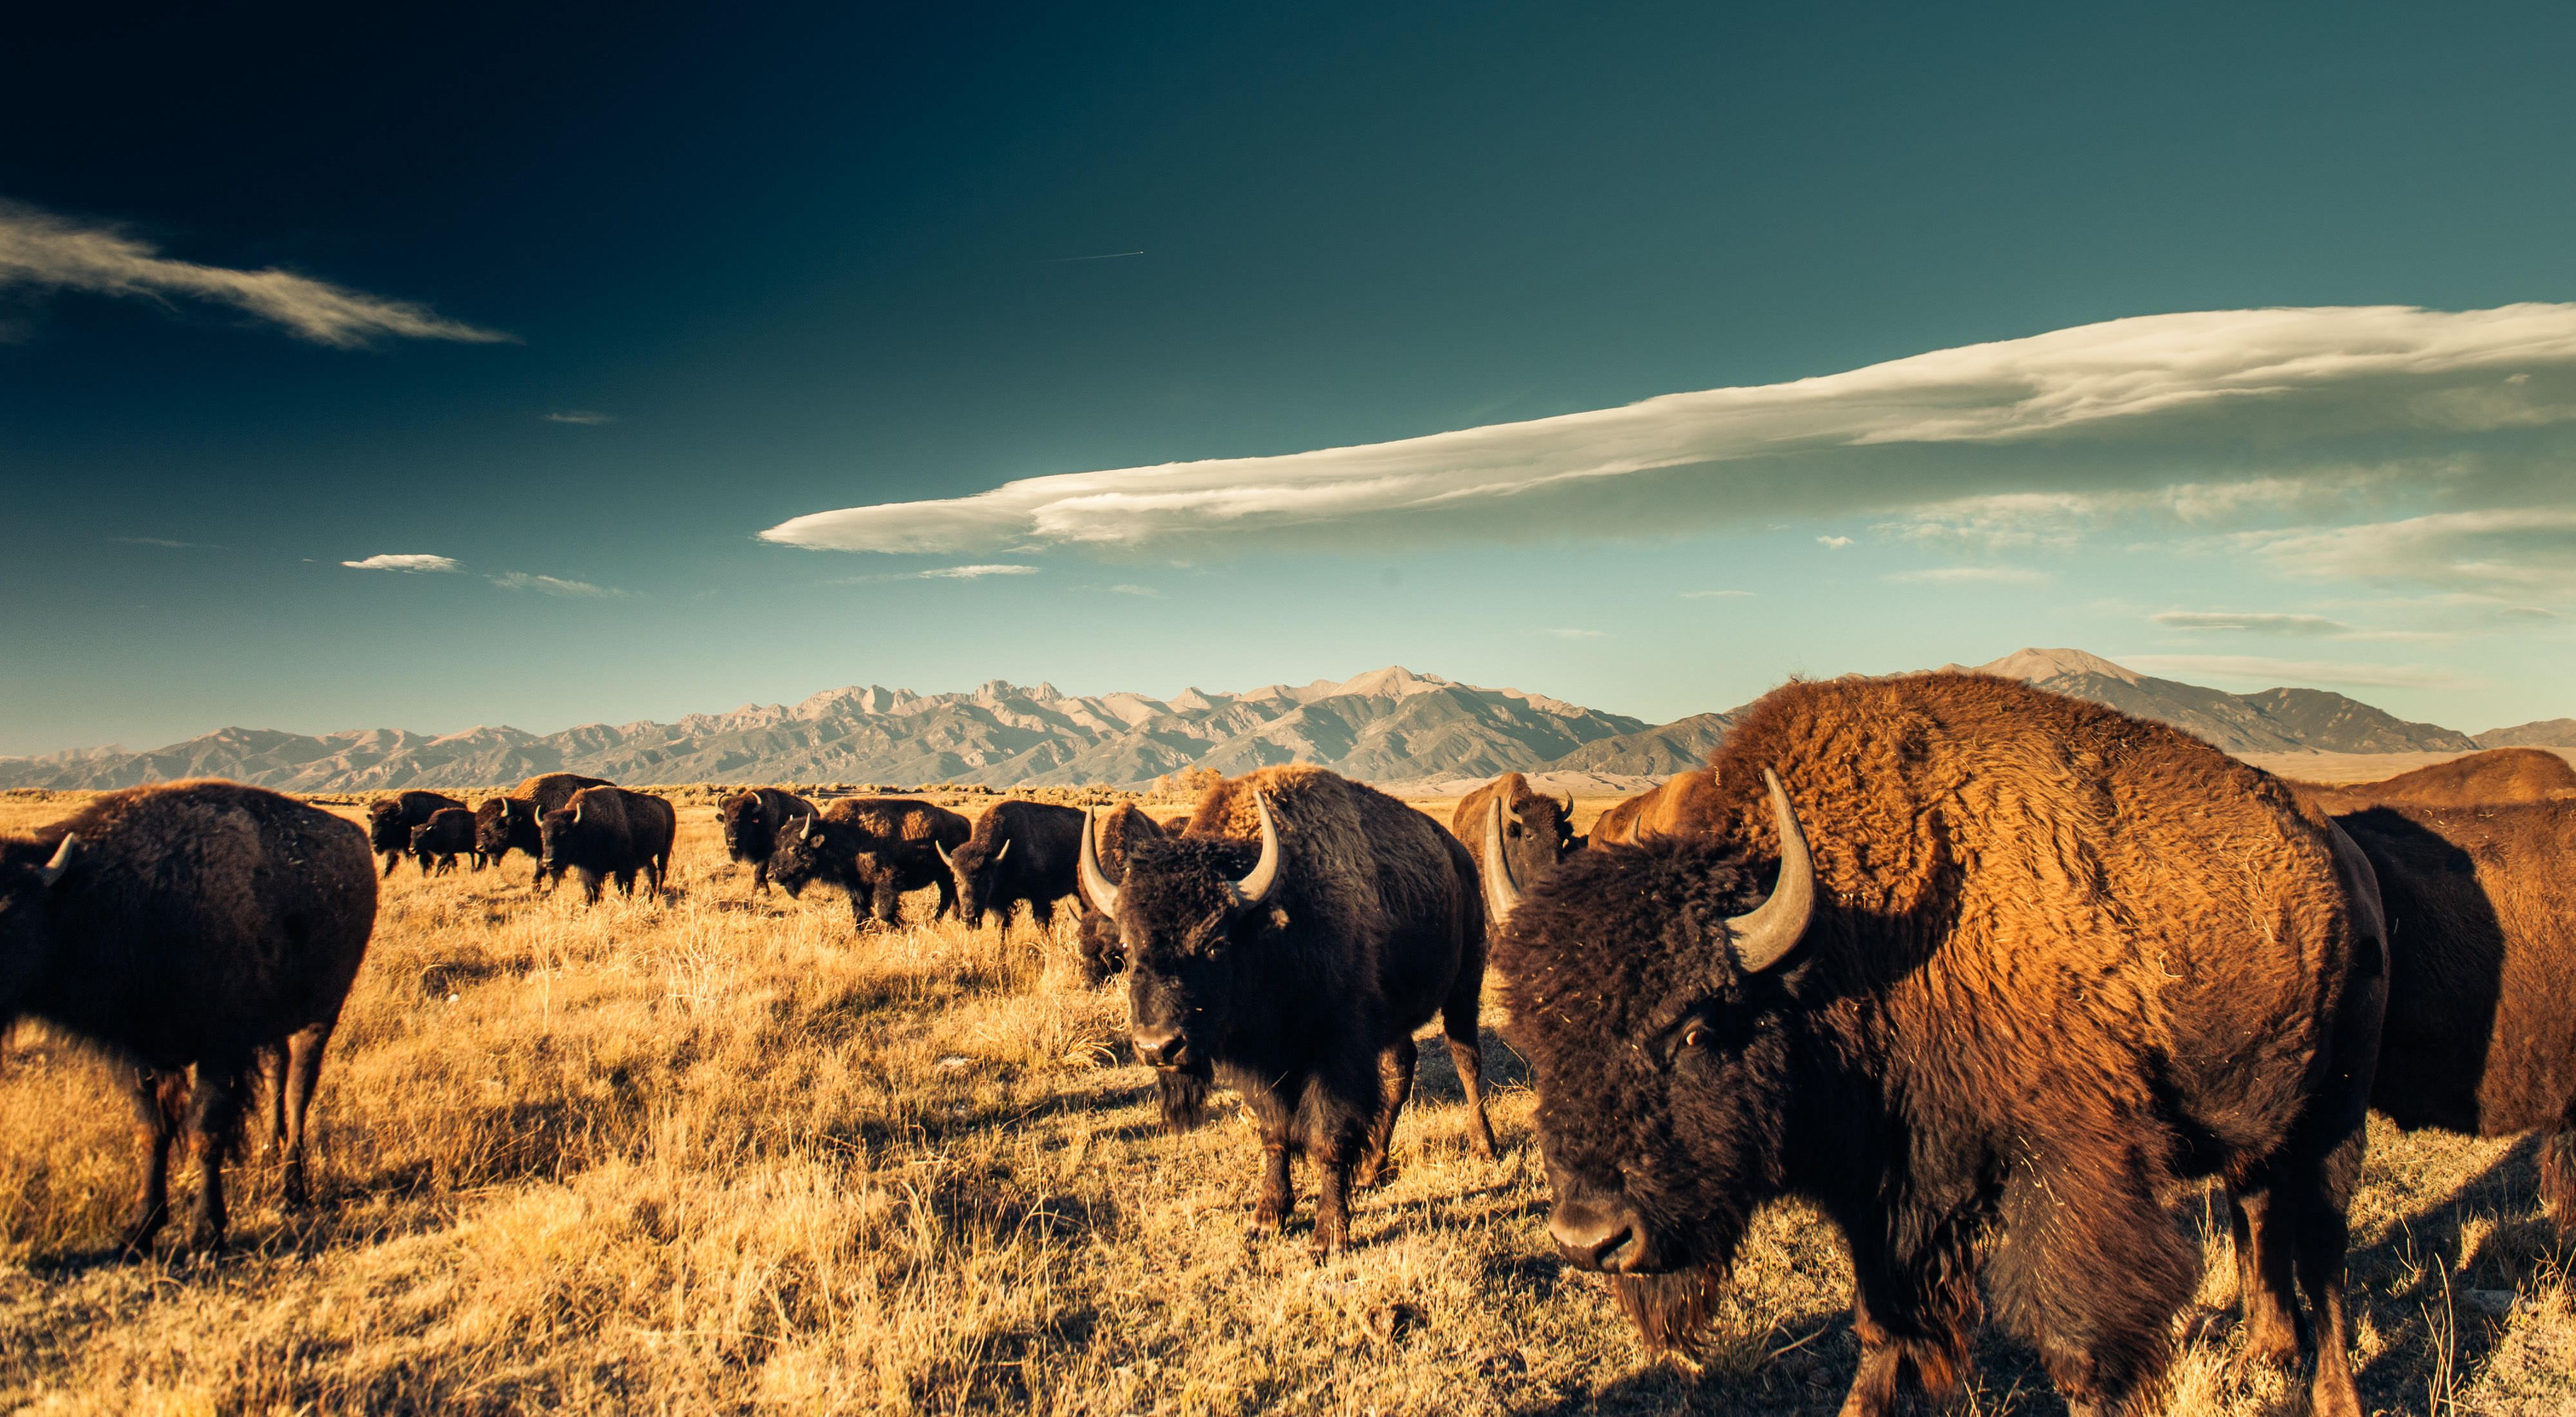 Herd of bison on a grassy plain with mountains in the background.